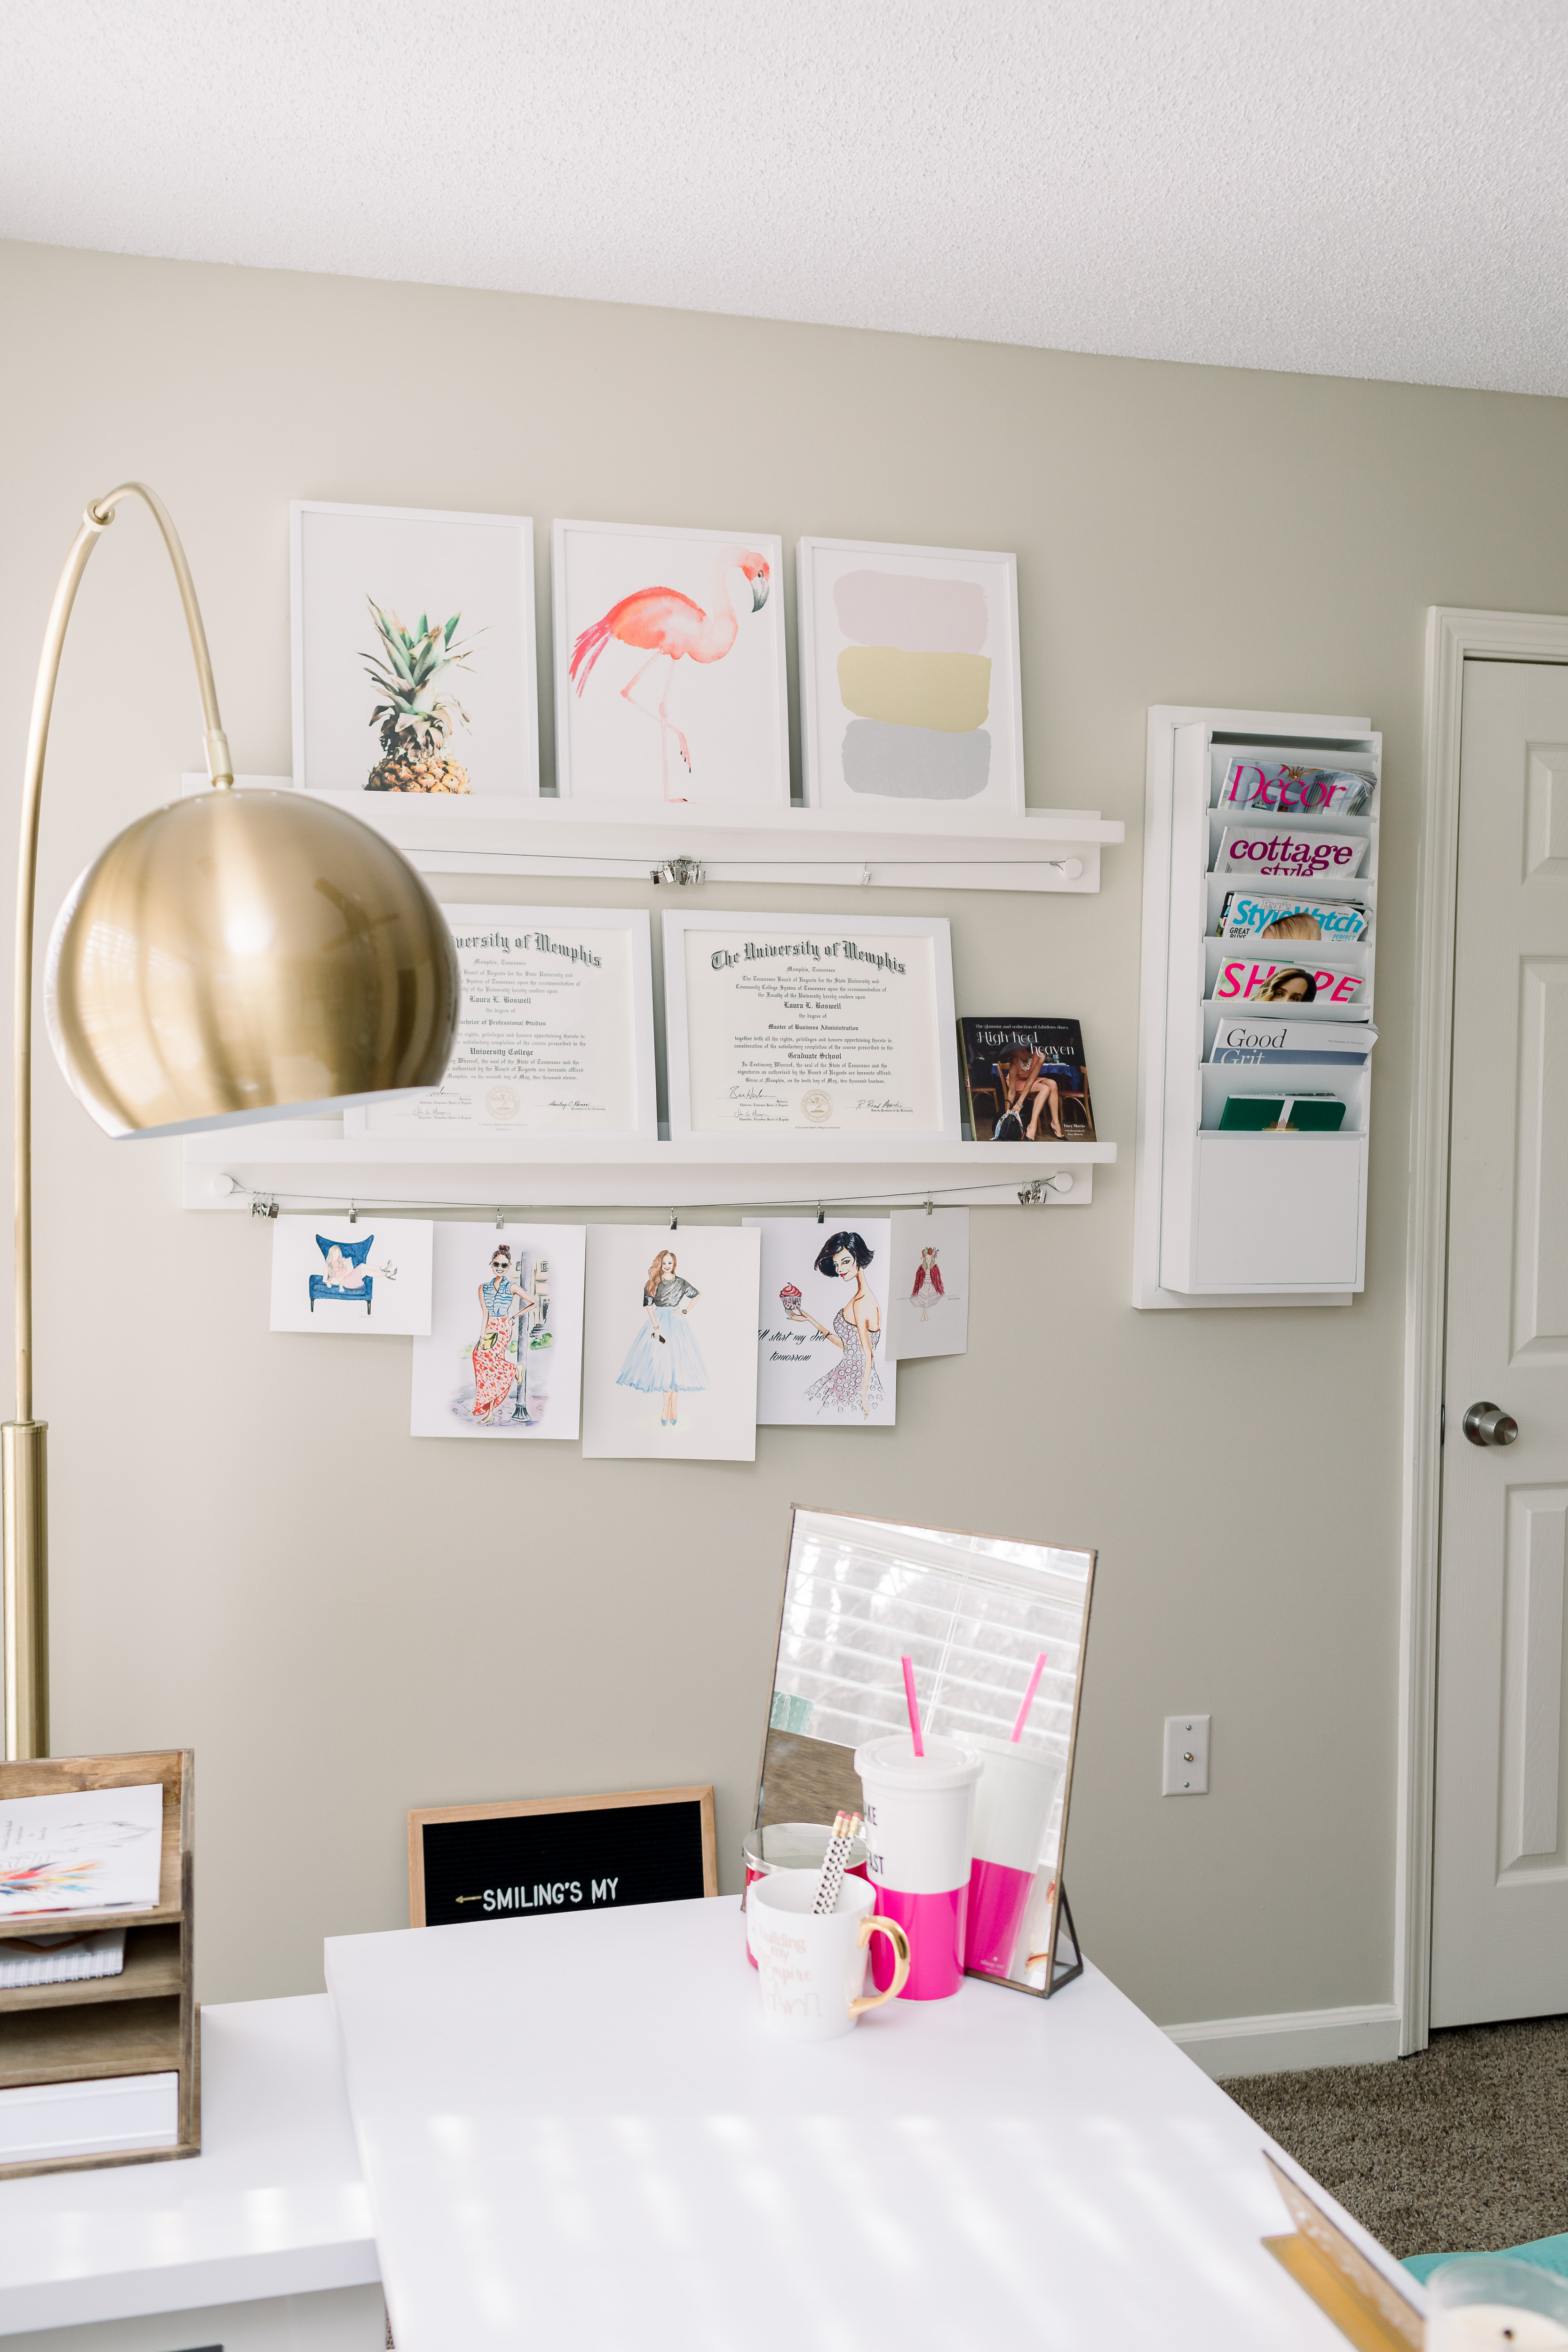 How to Organize your Office with Wayfair office furniture, tips featured by top Memphis life and style blog, Walking in Memphis in High Heels.